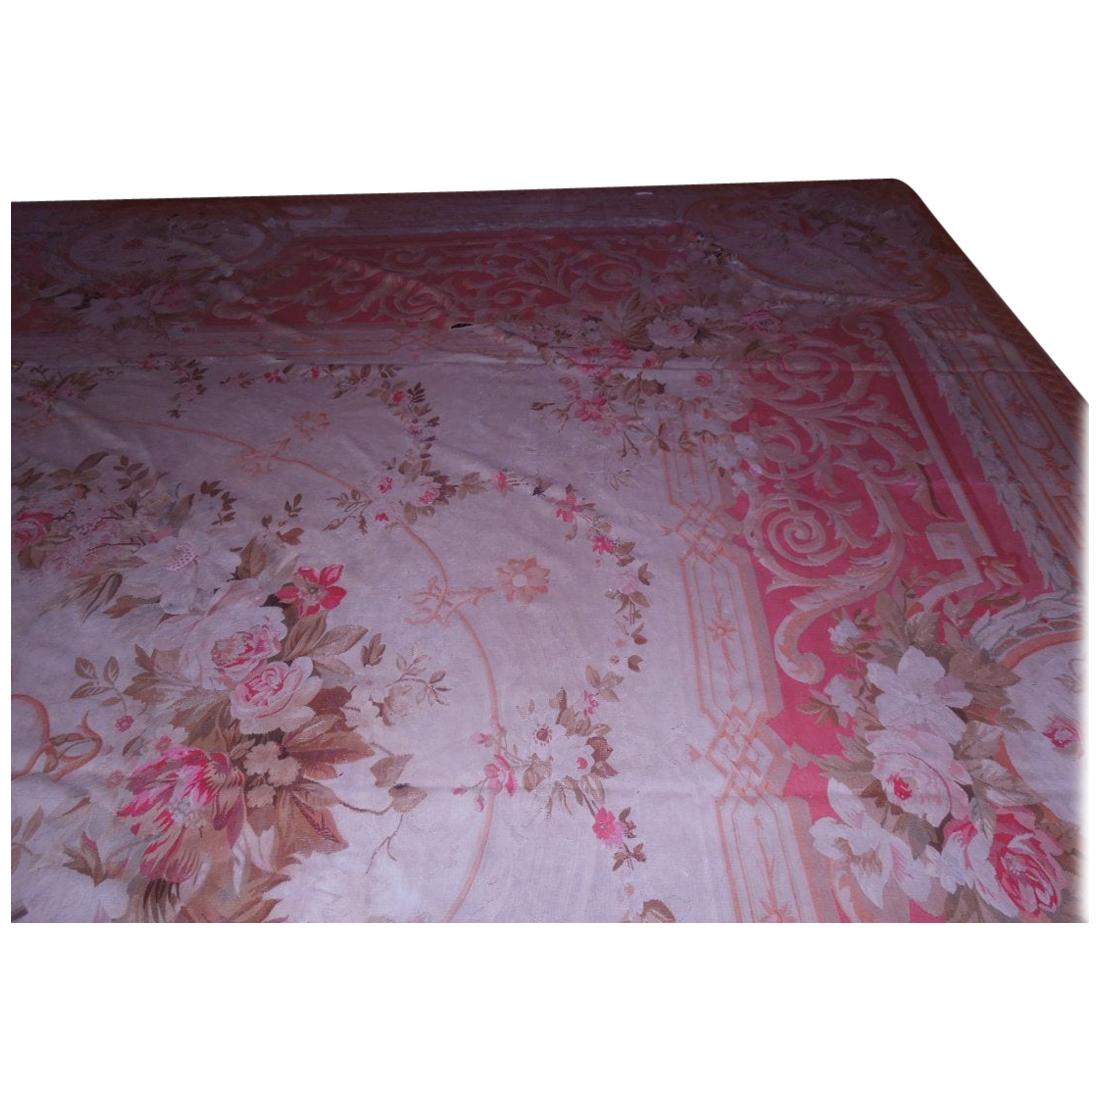 Large Antique Aubusson Rug in Apricot, Coral and Pink